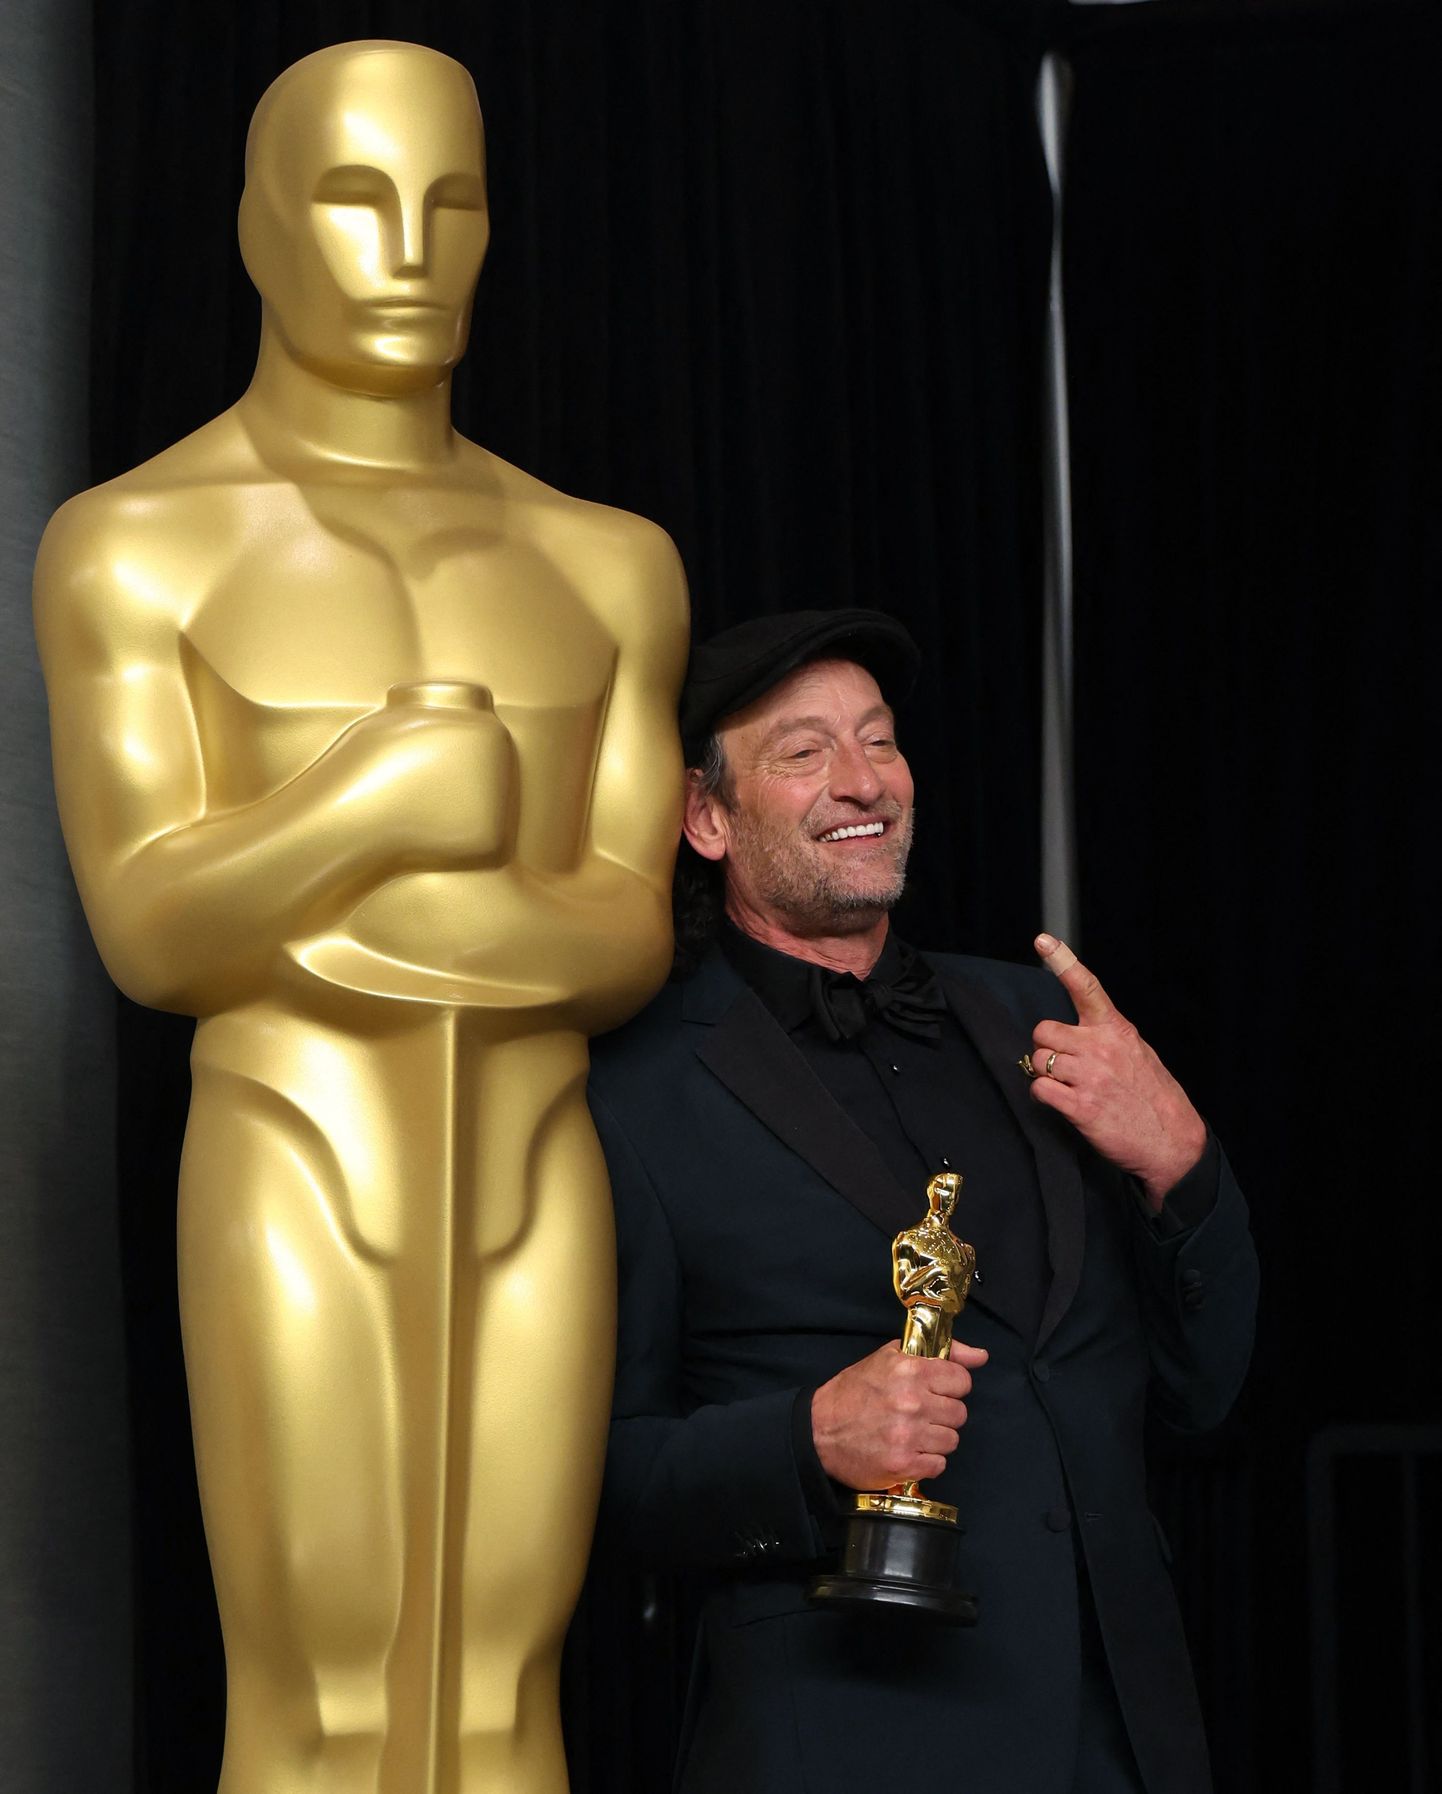 Best Supporting Actor winner Troy Kotsur poses with his Oscar in the photo room during the 94th Academy Awards in Hollywood, Los Angeles, California, U.S., March 27, 2022.  REUTERS/Mario Anzuoni